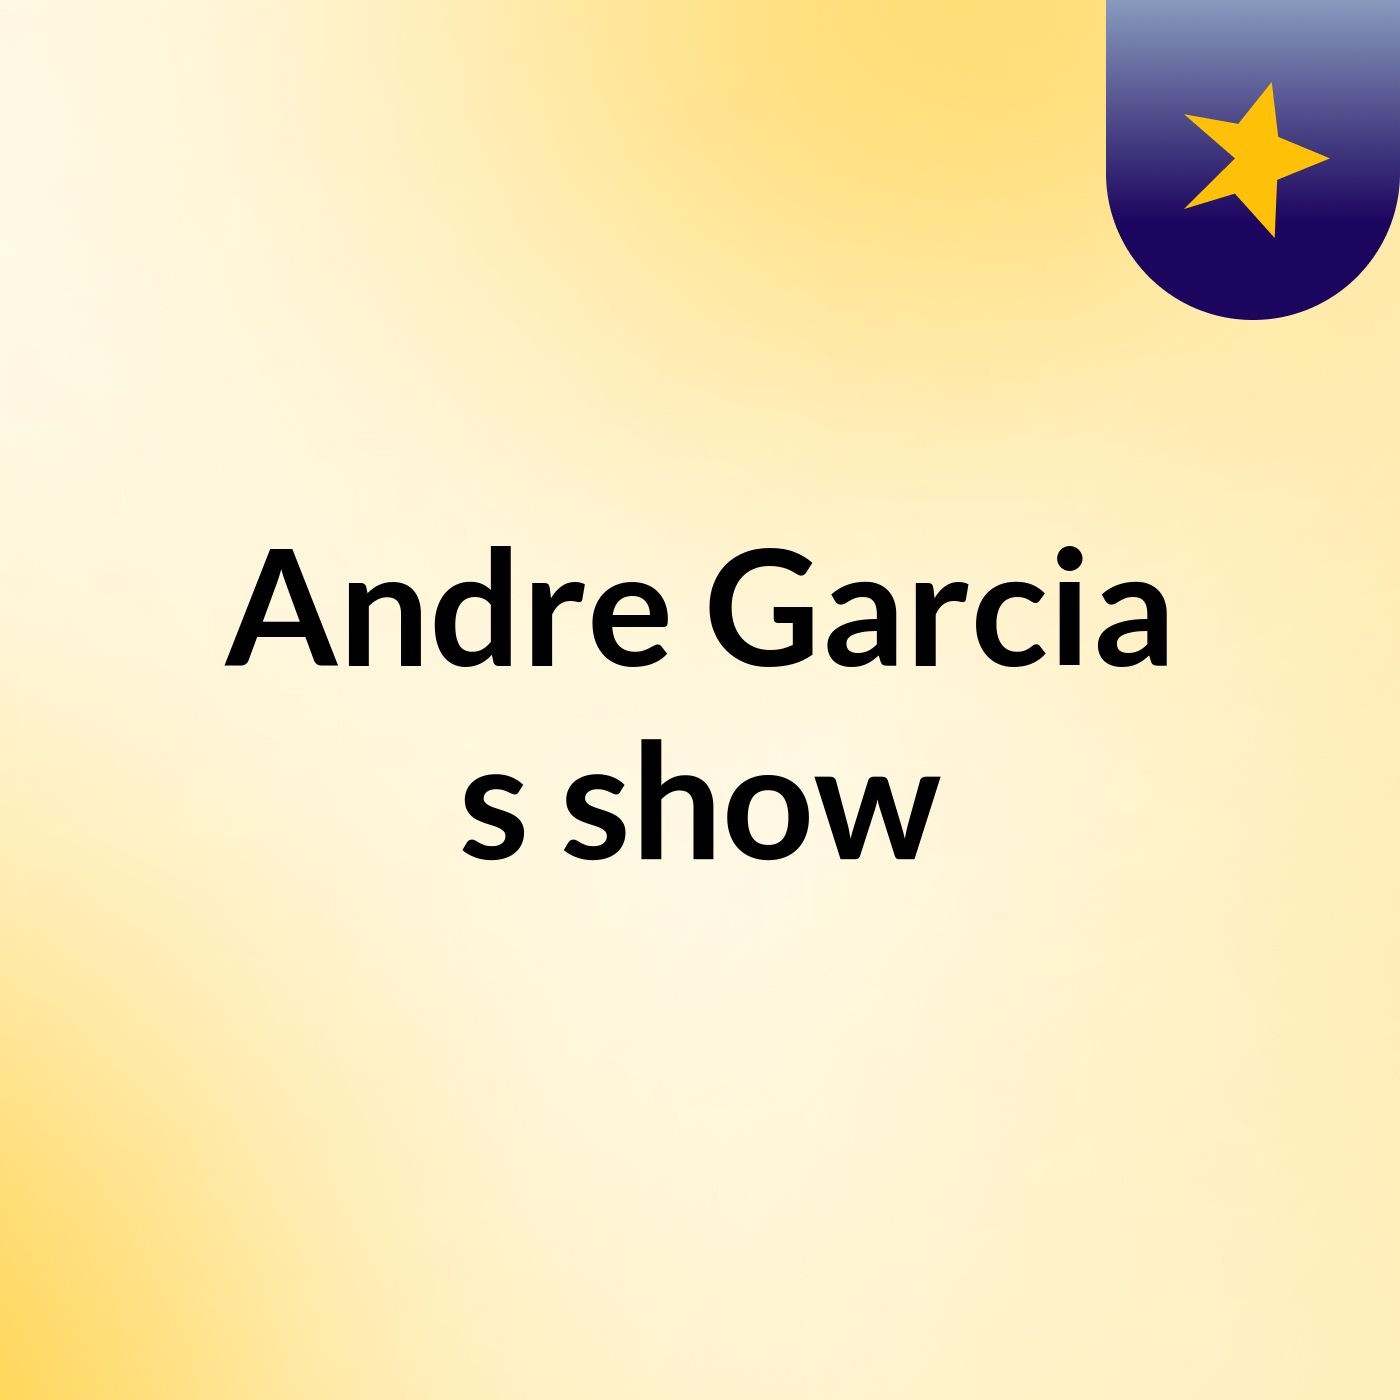 Andre Garcia's show